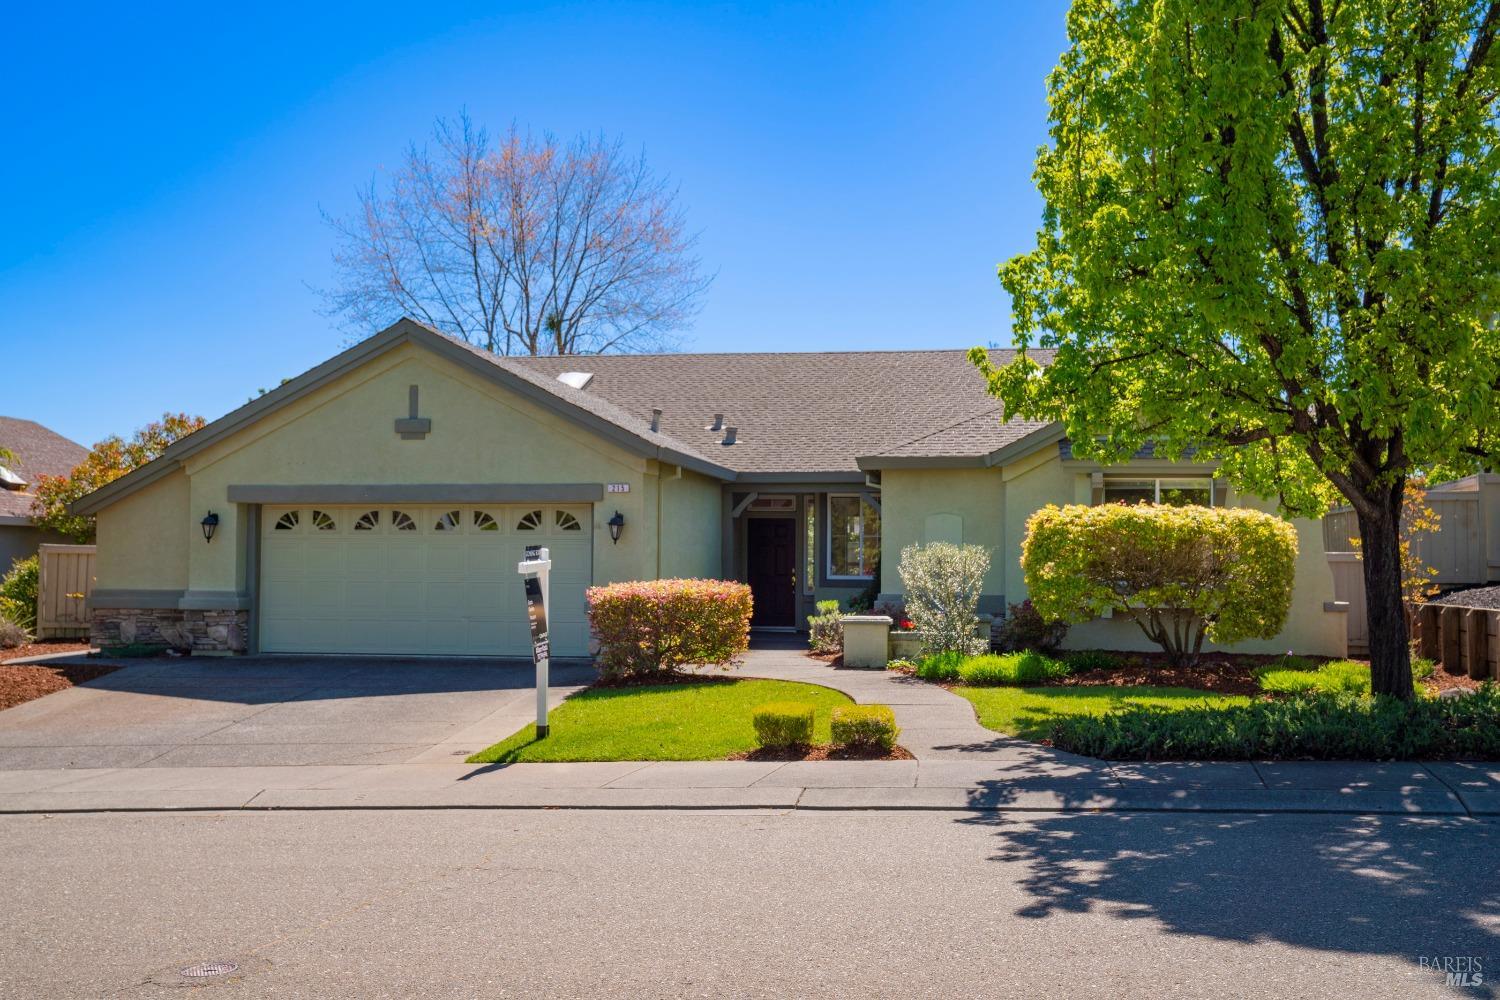 Photo of 215 Red Mountain Dr in Cloverdale, CA